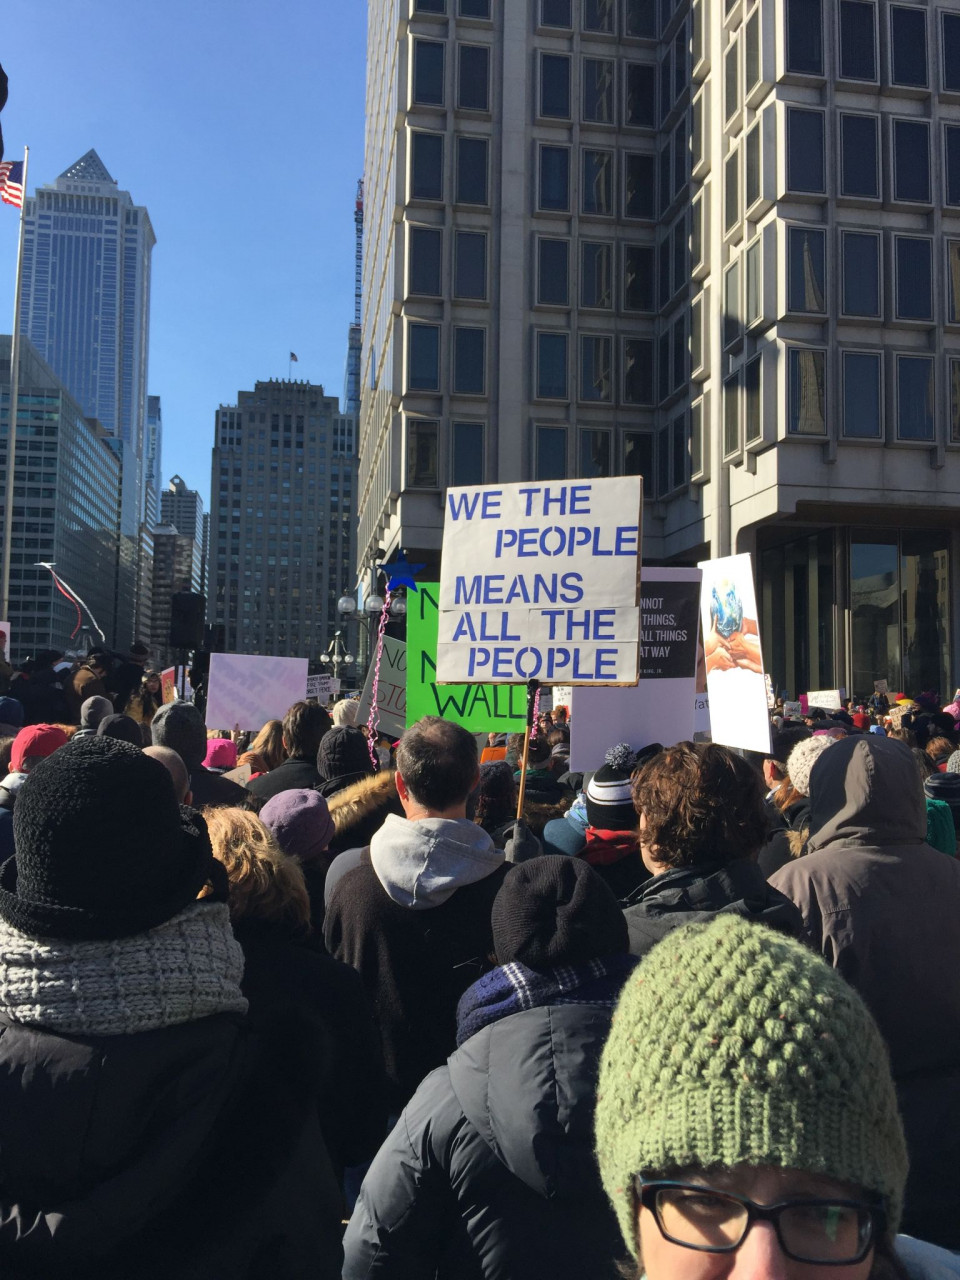 Immigrant Rights Protest - Philadelphia - February 4, 2017 We the People, Means All the People